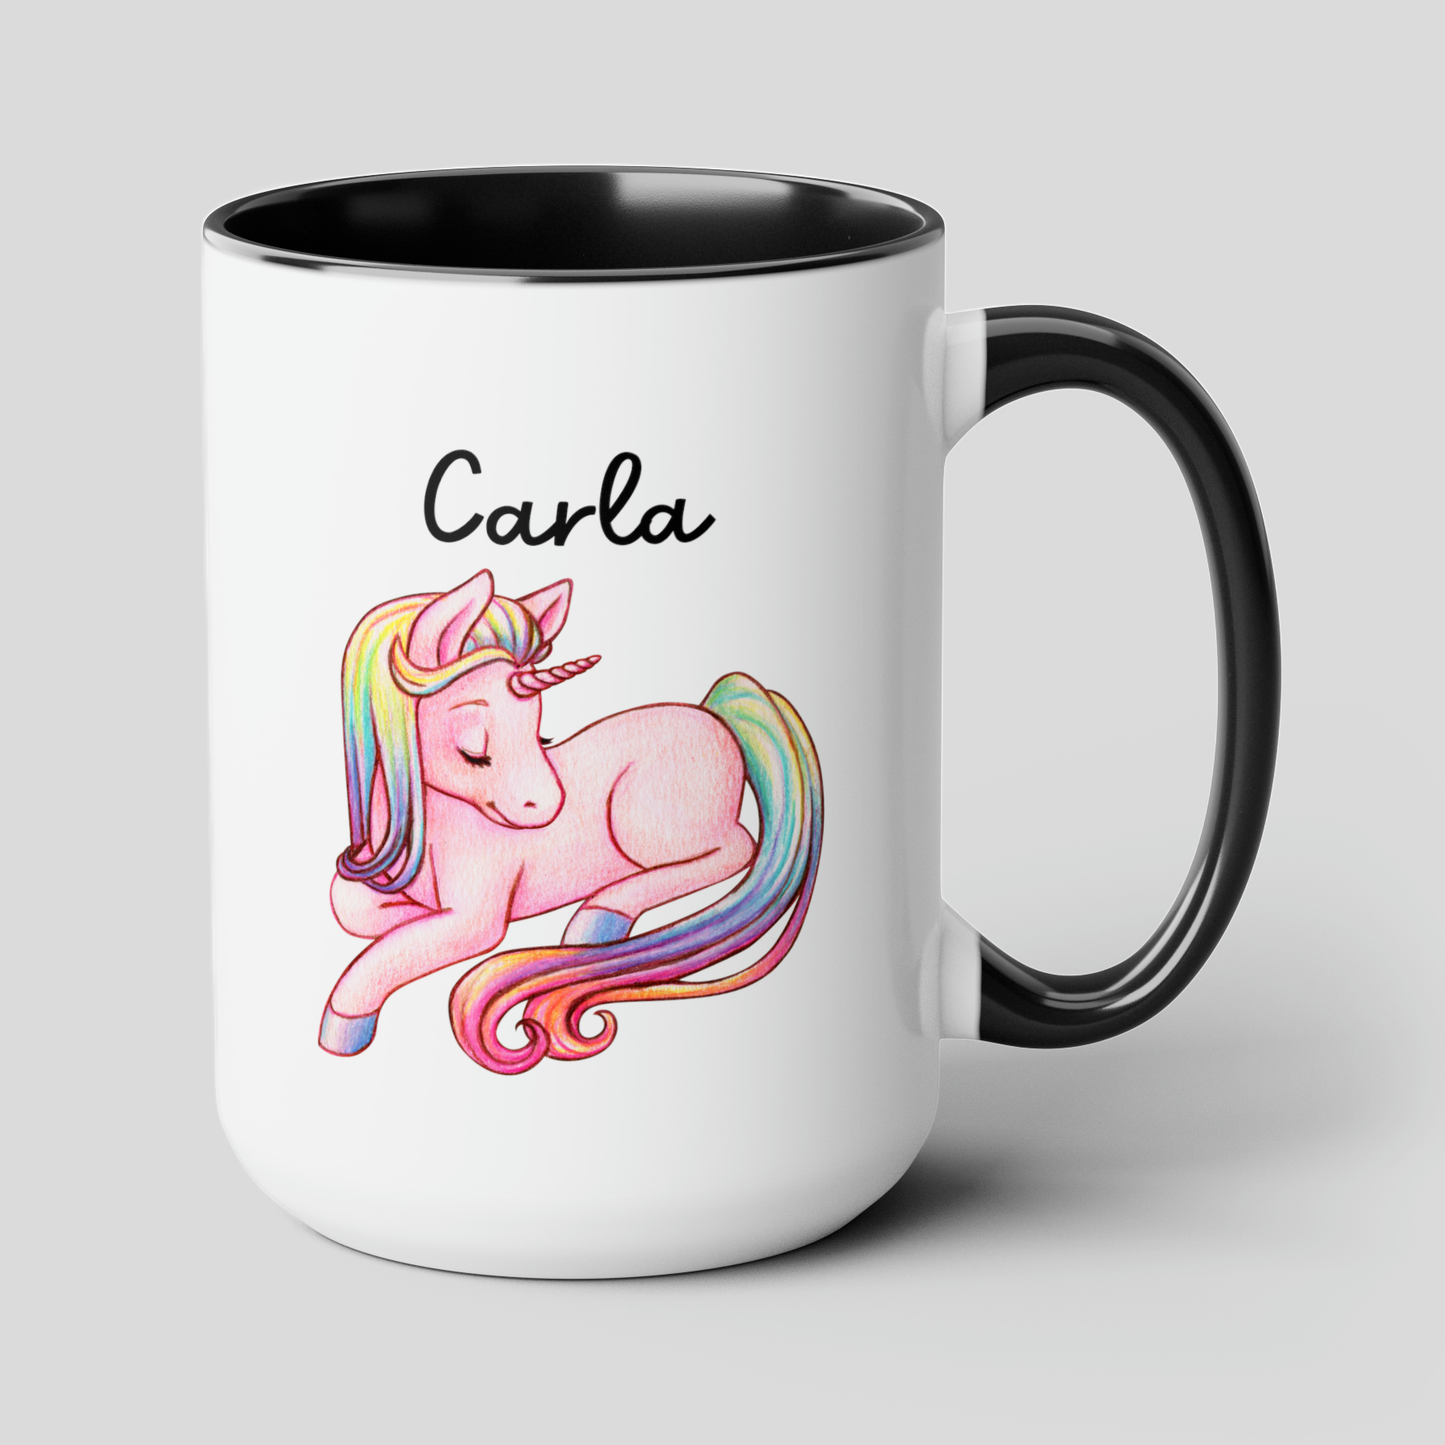 Unicorn Name 15oz white with black accent funny large coffee mug gift for kids children horse pony girls animal create your own custom customized personalized waveywares wavey wares wavywares wavy wares cover